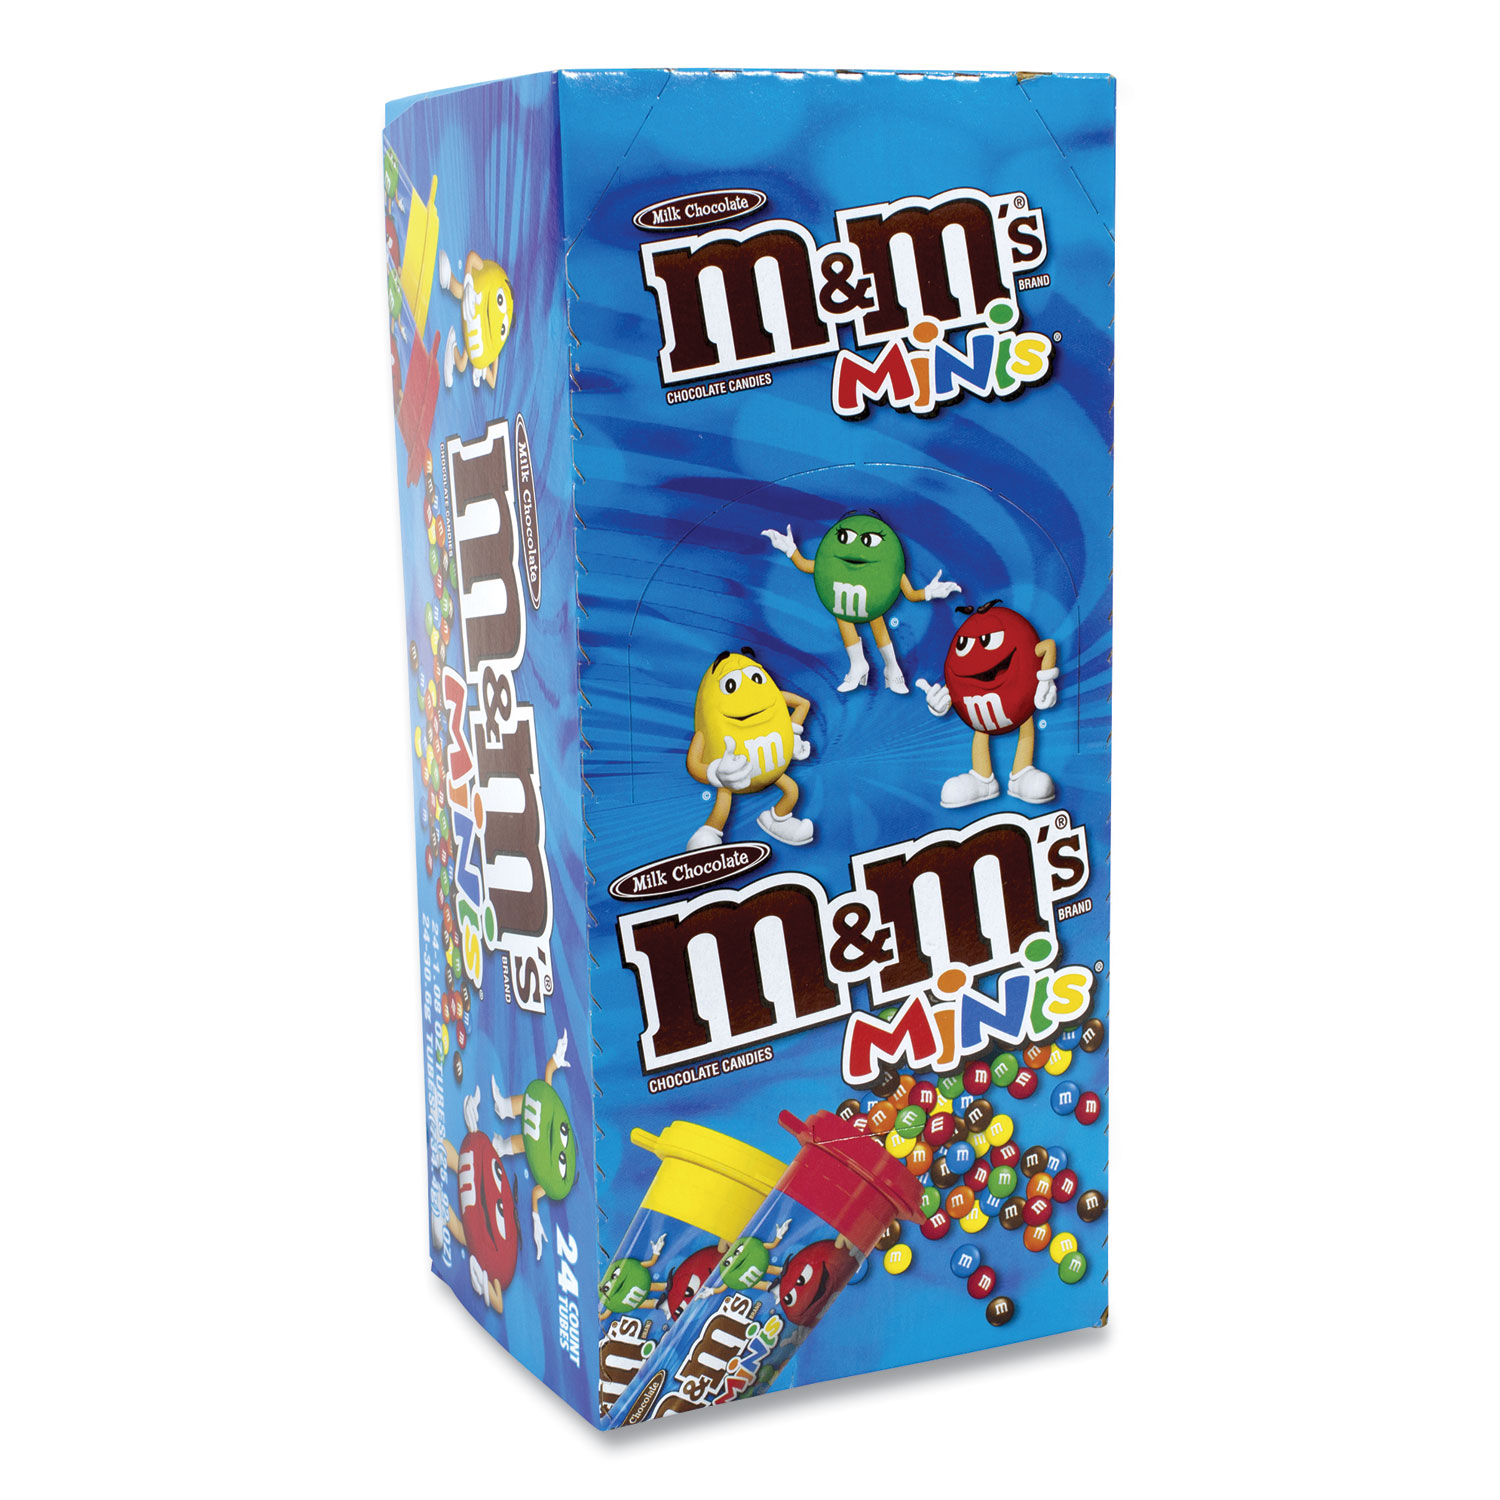  M & M's 551237 Milk Chocolate Mini Tubes, 1.08 oz, 24 Tubes/Box, Free Delivery in 1-4 Business Days (GRR20900061) 